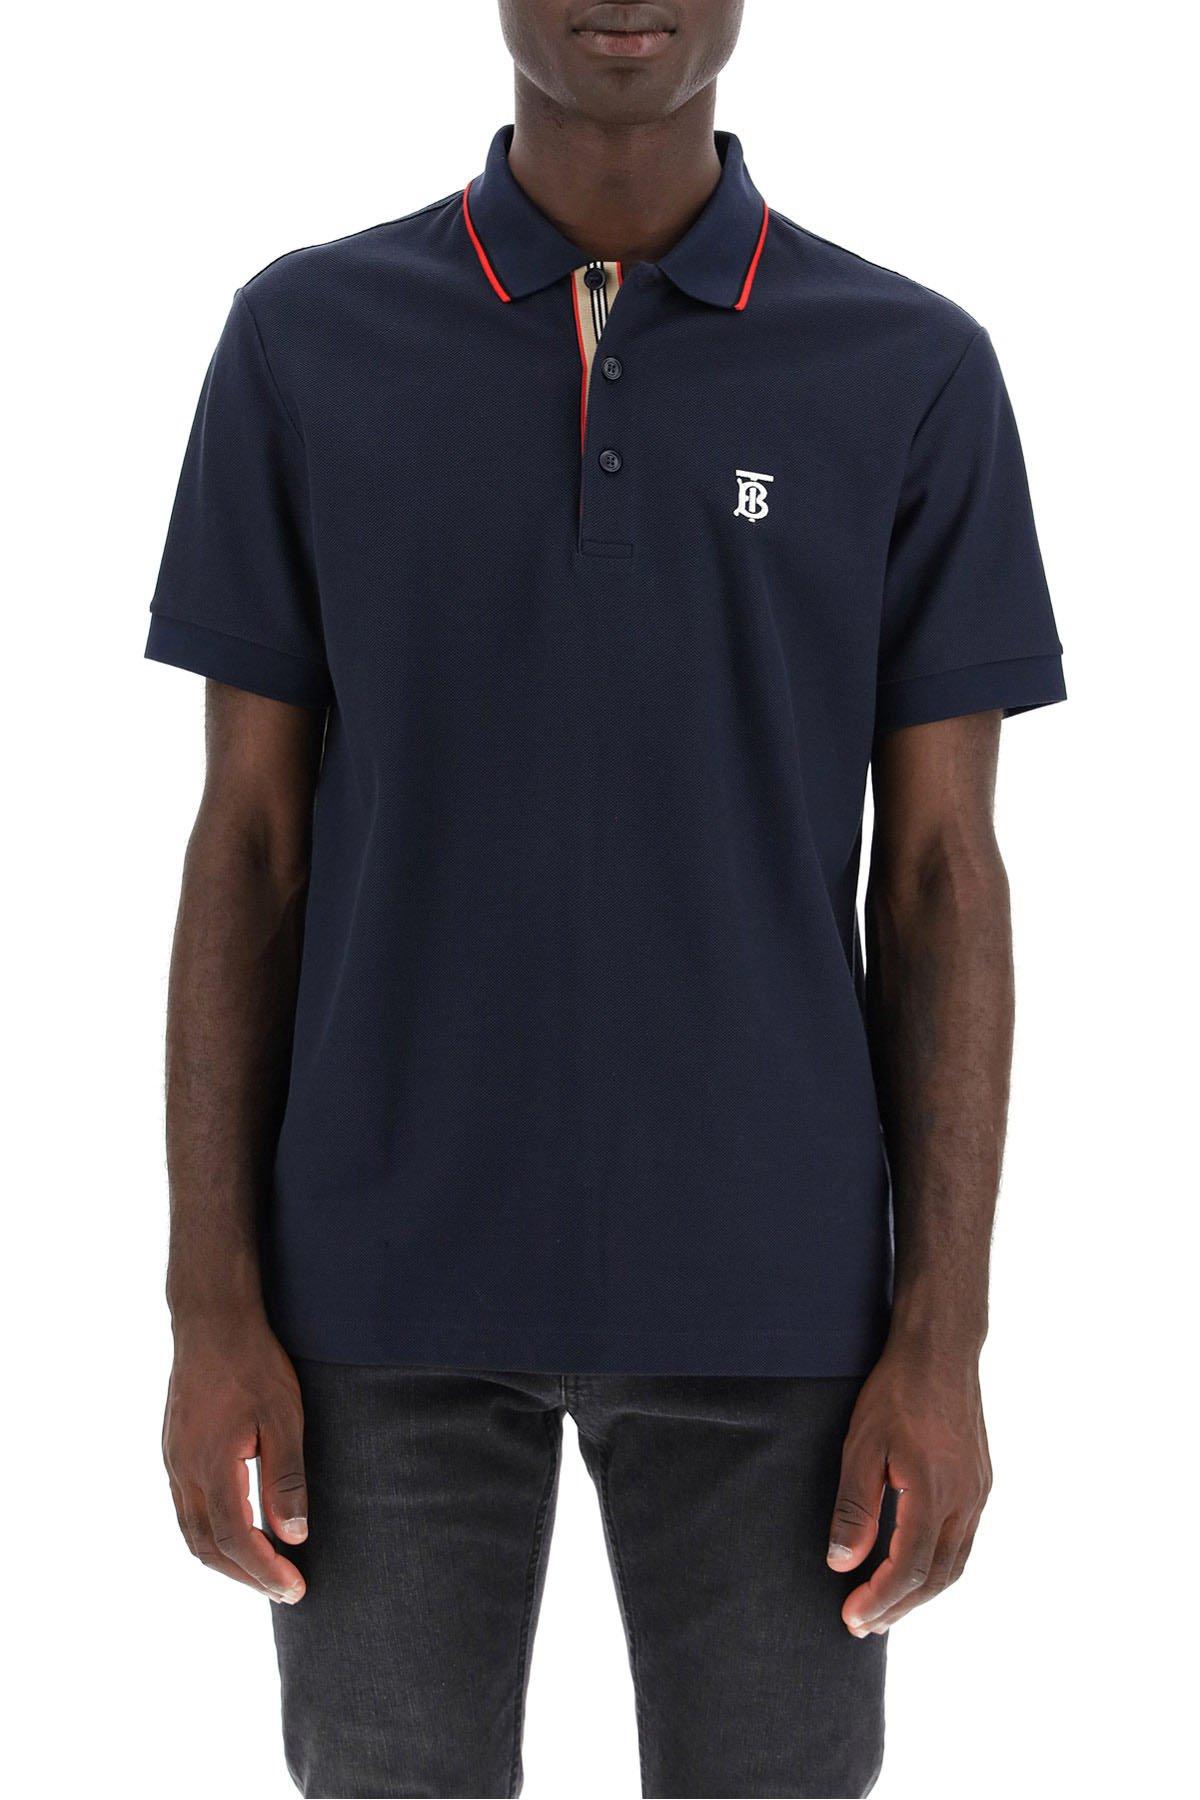 Burberry Icon Stripe Pique Polo in Navy (Blue) for Men - Save 63% | Lyst